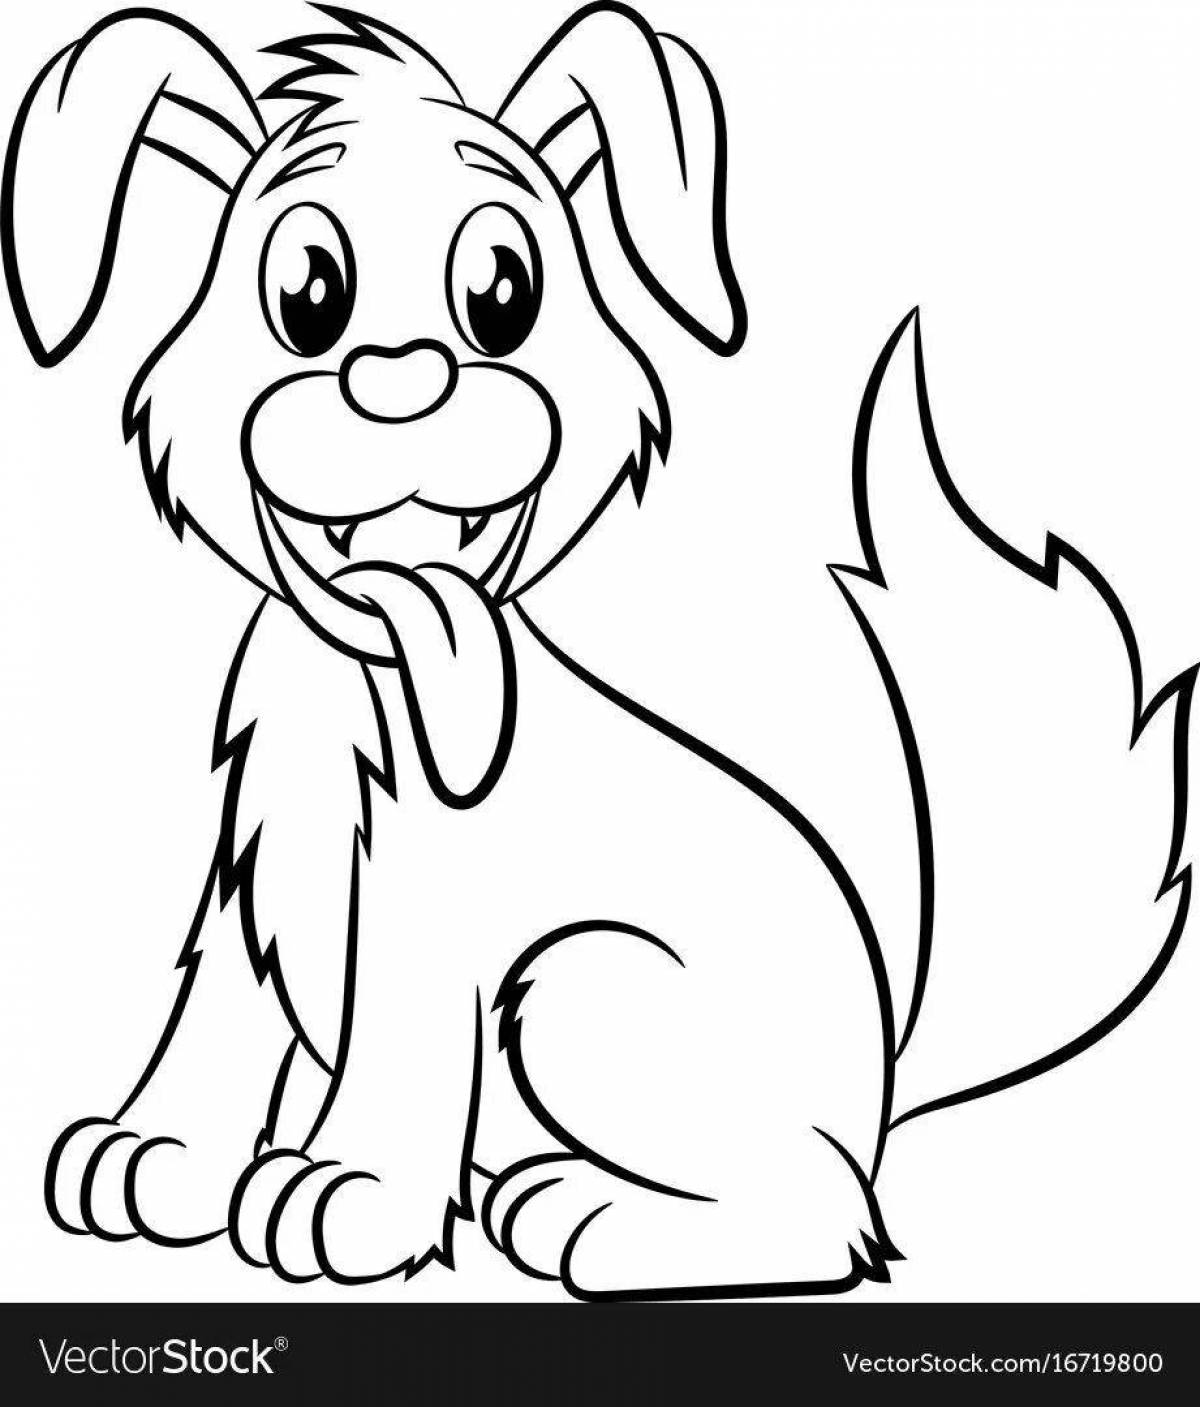 Live coloring my puppy Mikhalkov for kids